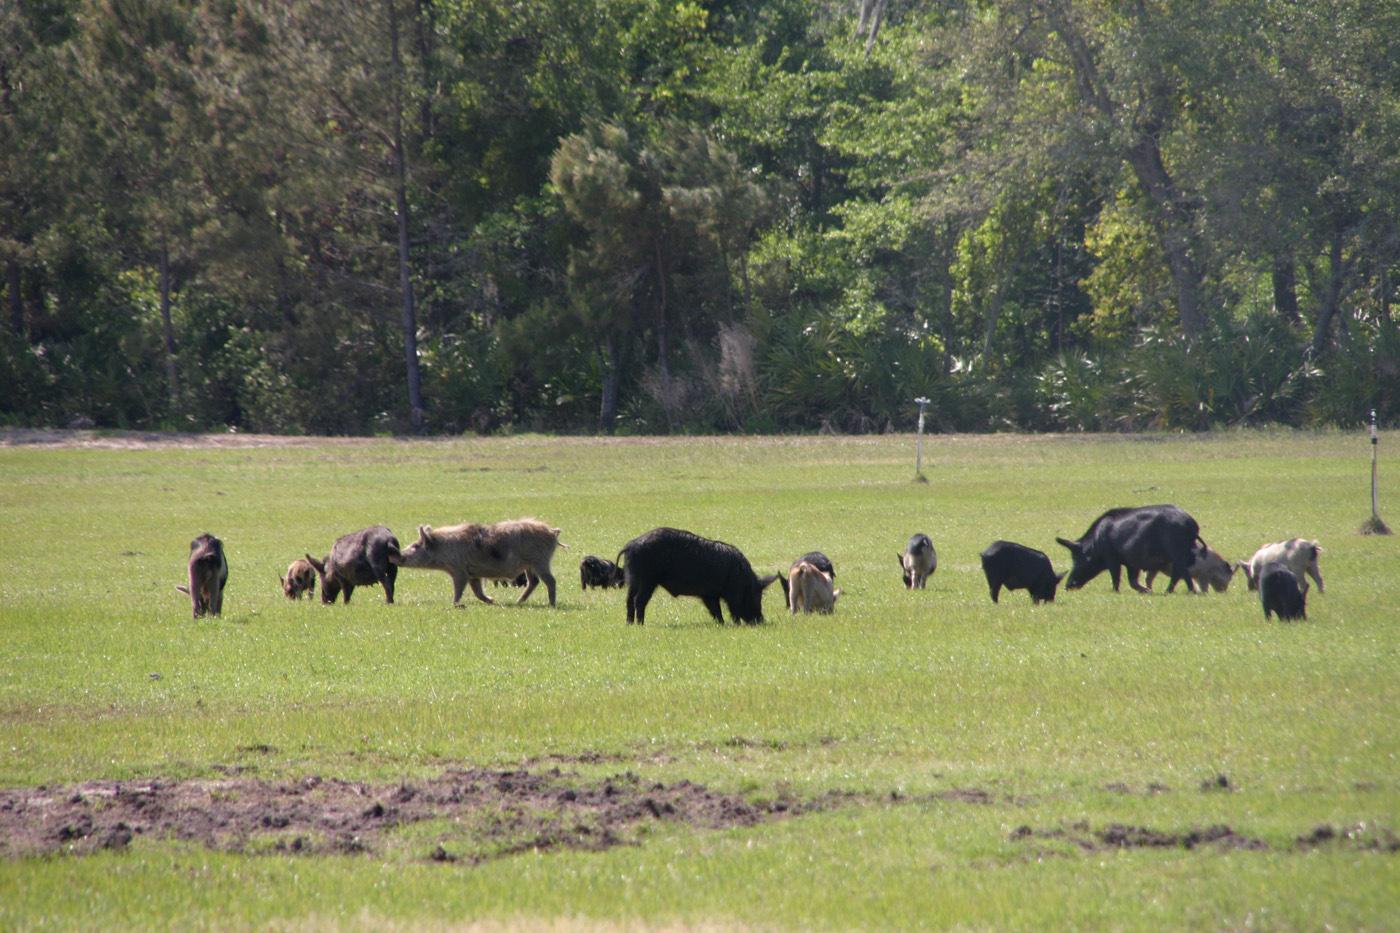 The wild pig herd pictured here caused significant damage in a short amount of time by rooting the land. (Photo by USDA APHIS/Carol Bannerman)